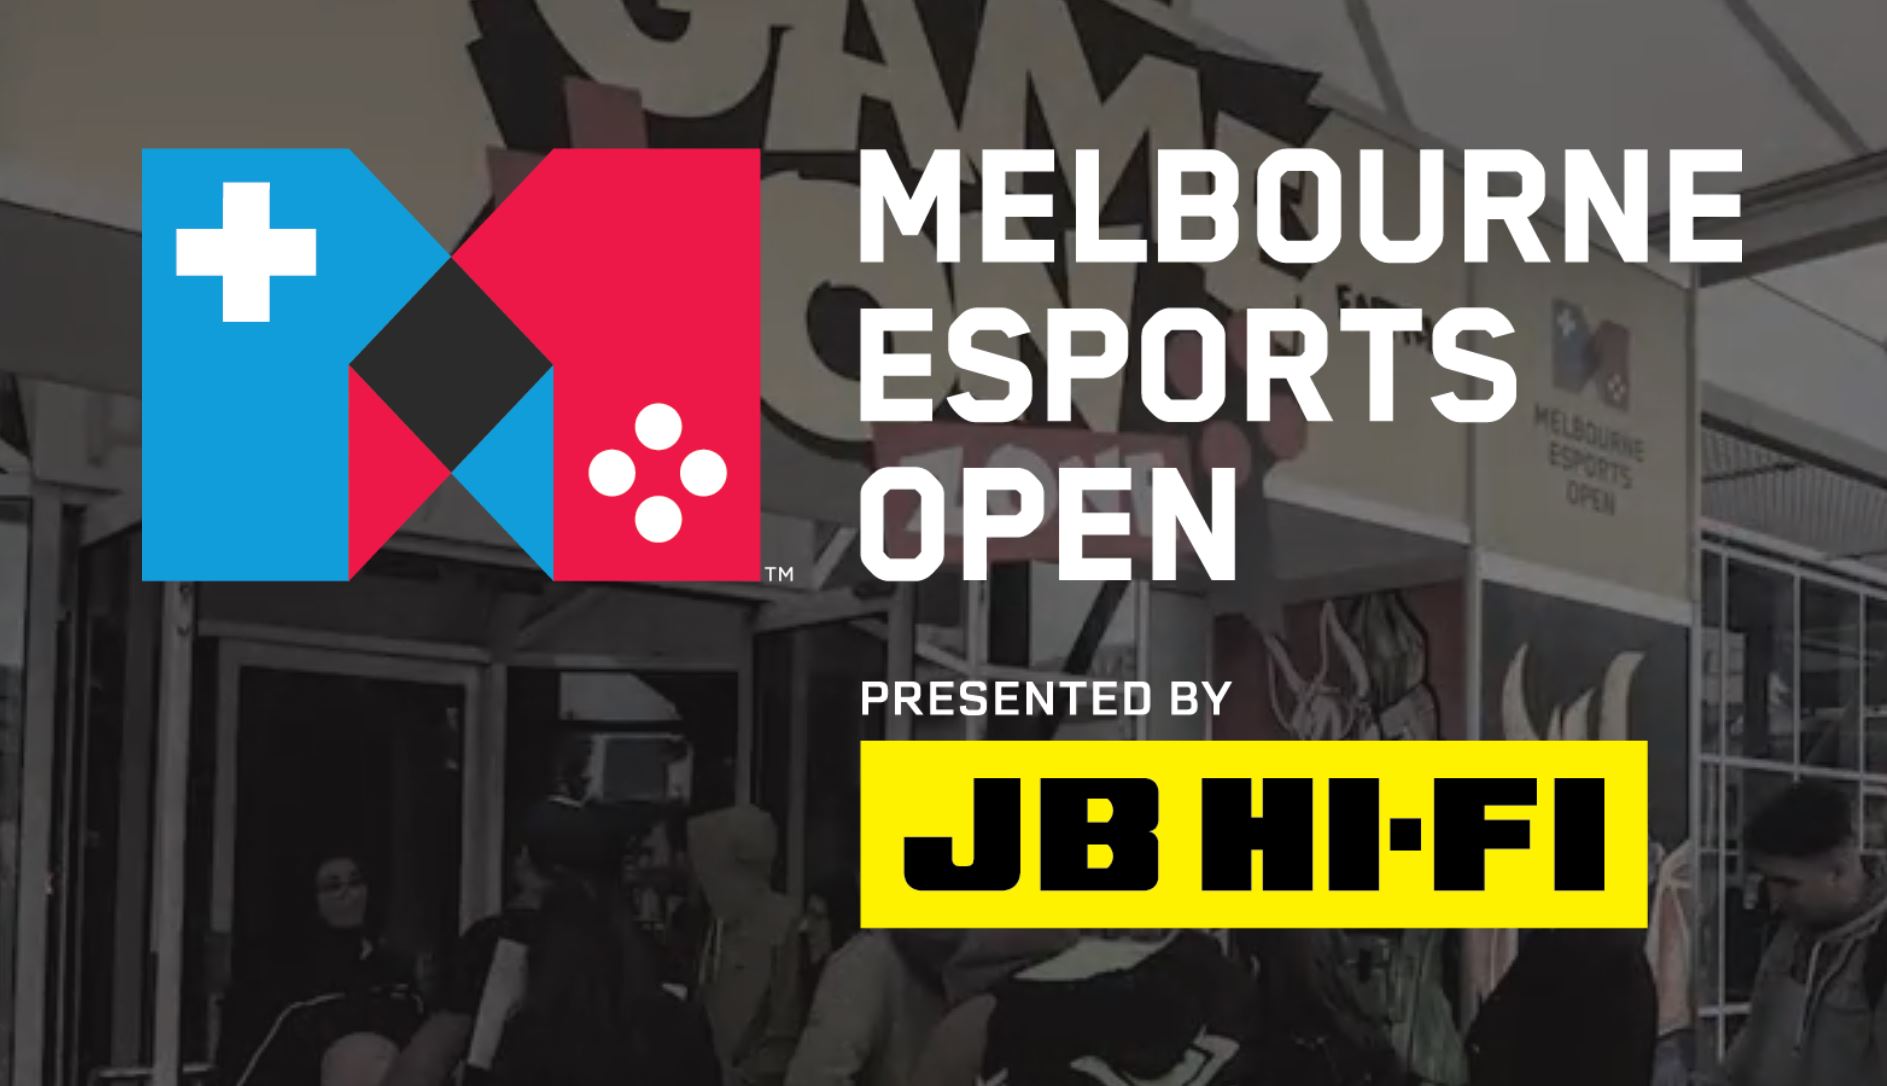 Win $20,000 At Melbourne Esports Open This Weekend!